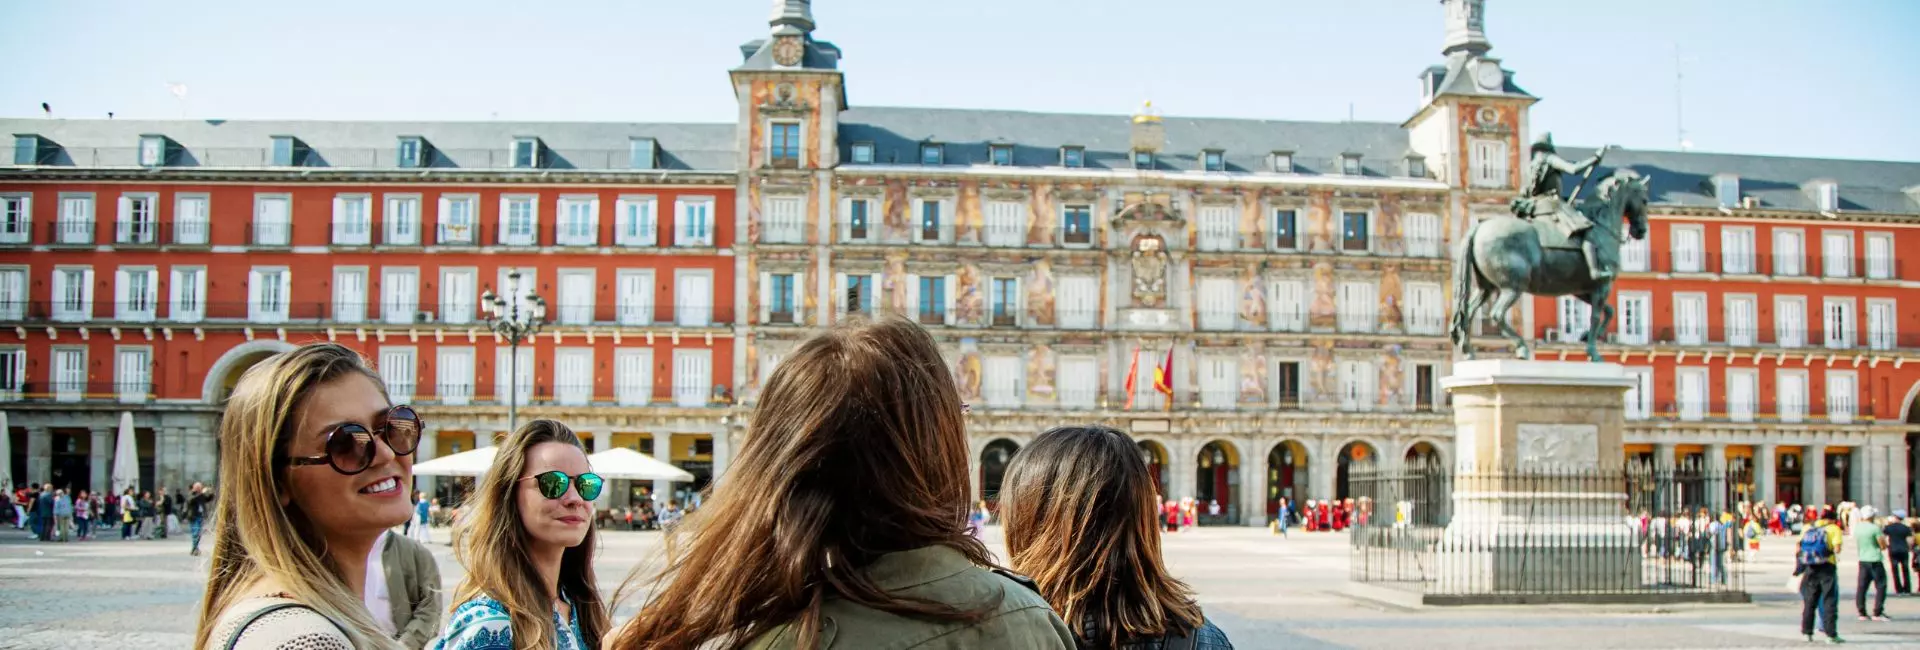 What to do in Madrid’s City Centre in just 1 or 2 days?